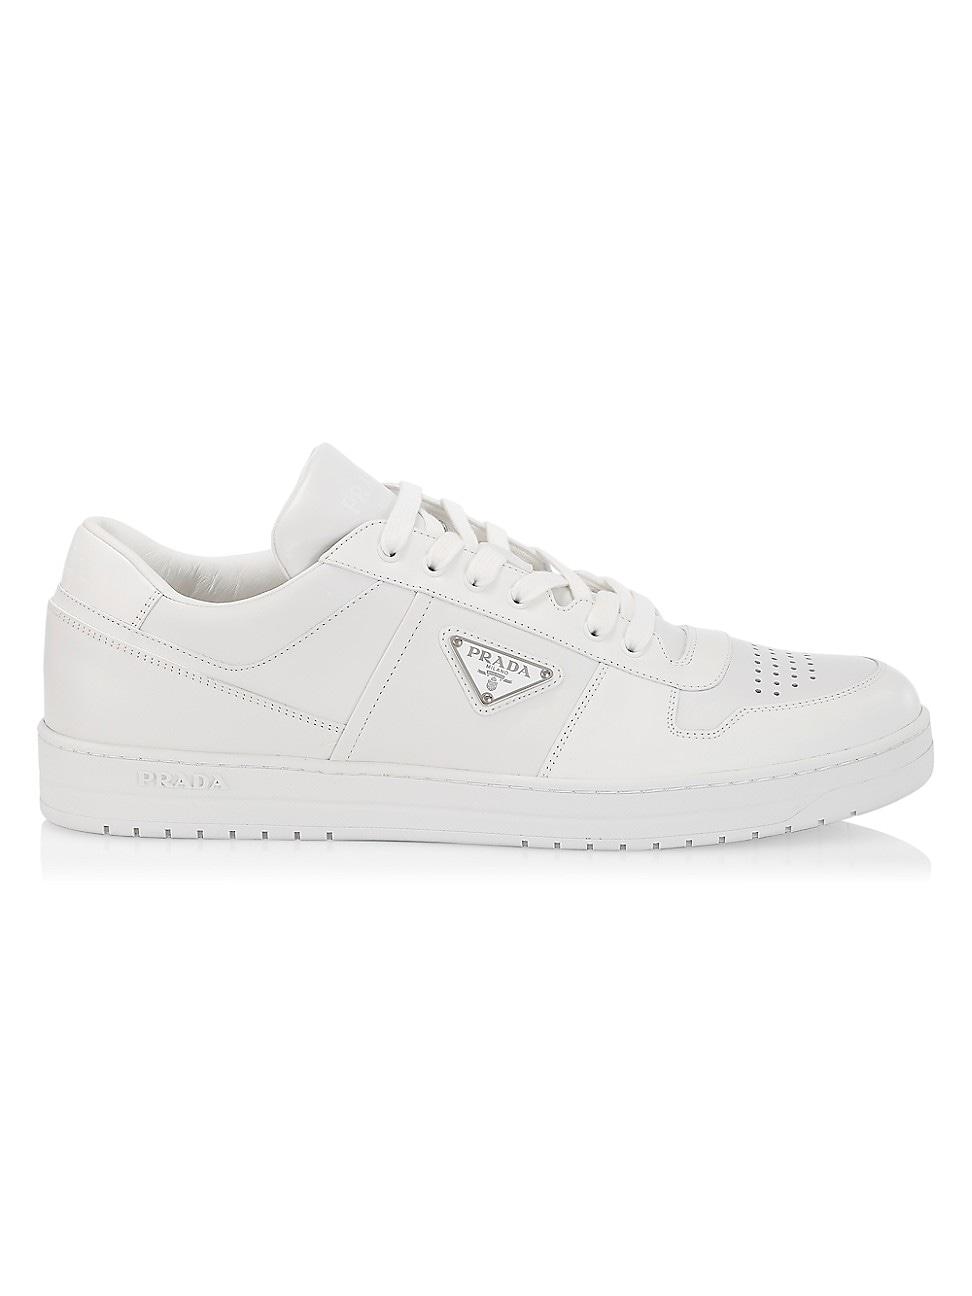 Prada Leather Downtown Lace-up Tennis Shoes in White for Men | Lyst